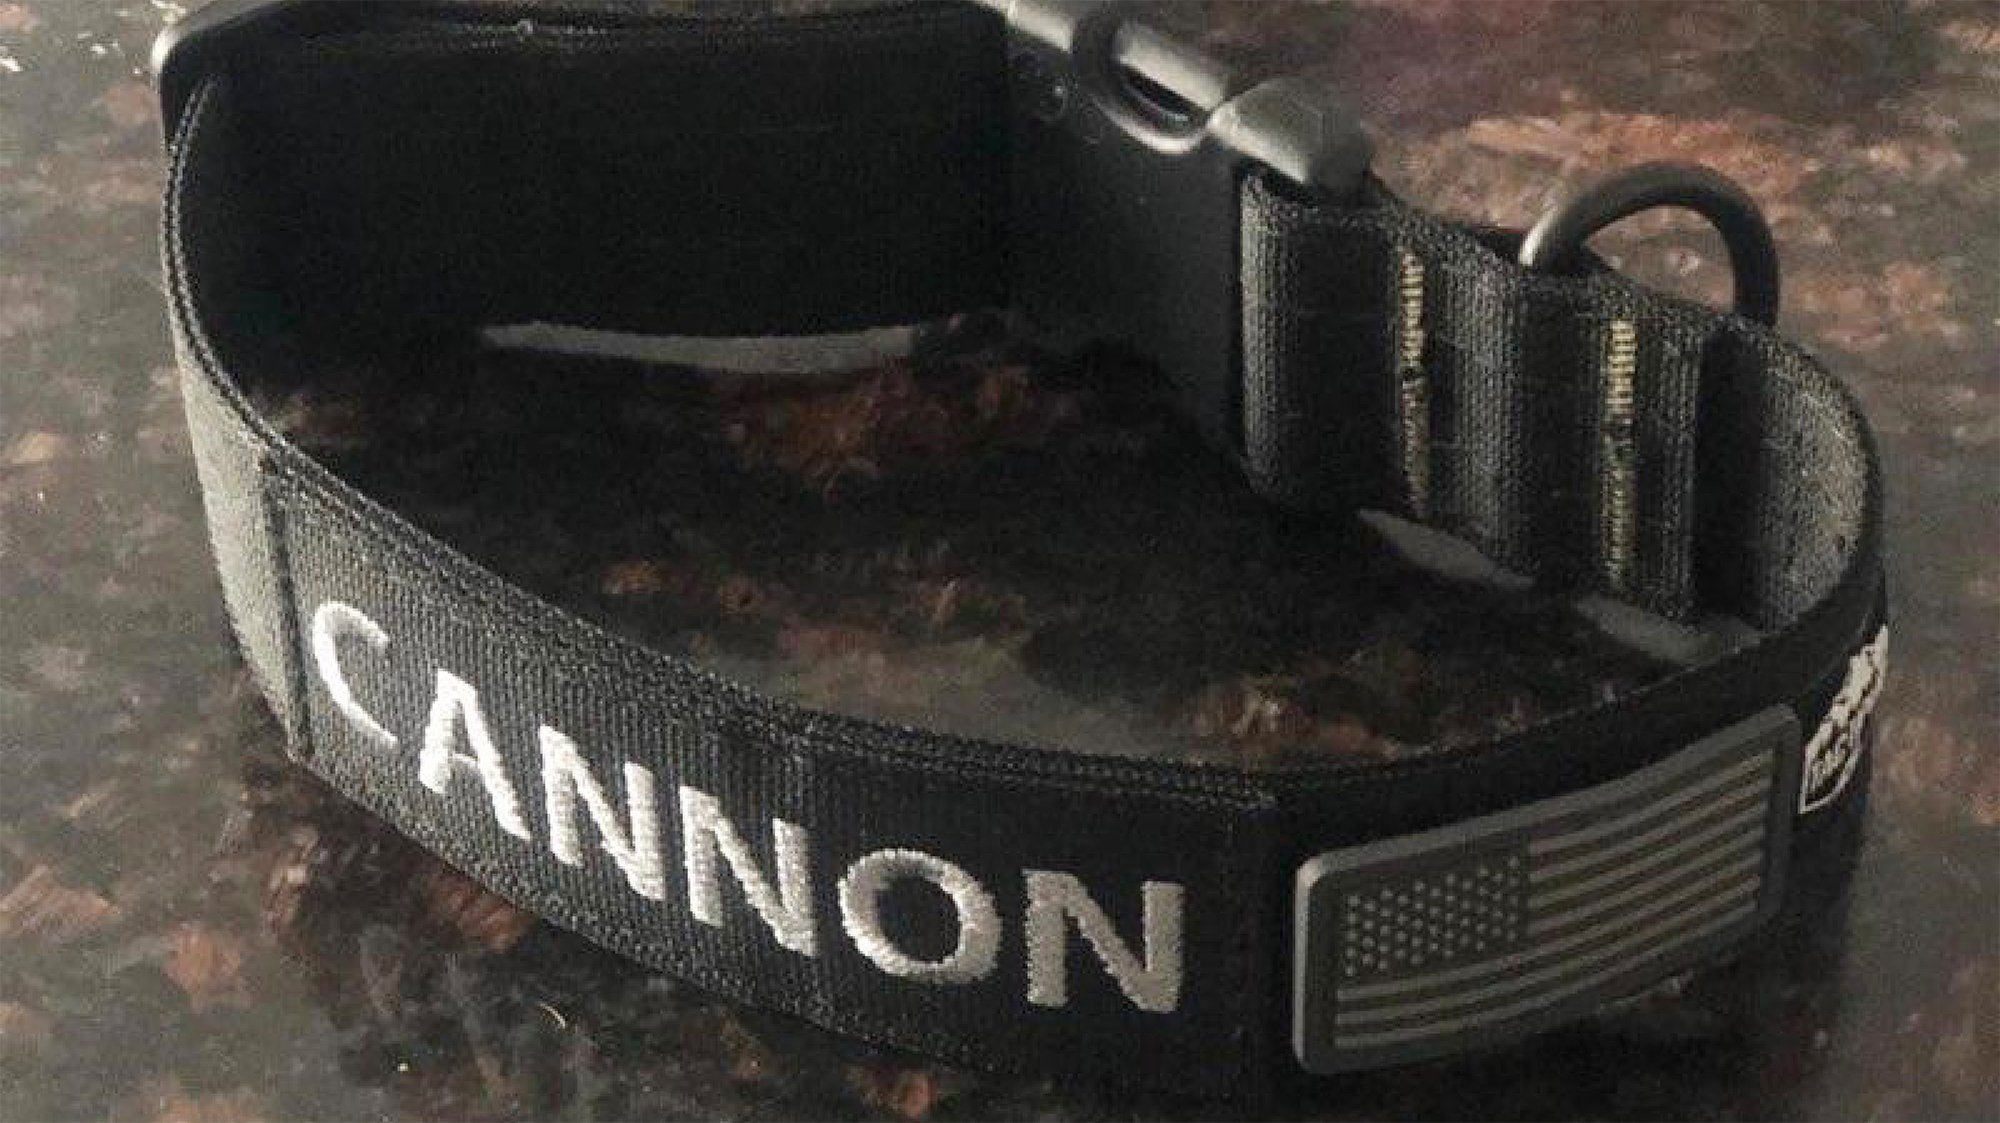 Cannon the K-9's Collar